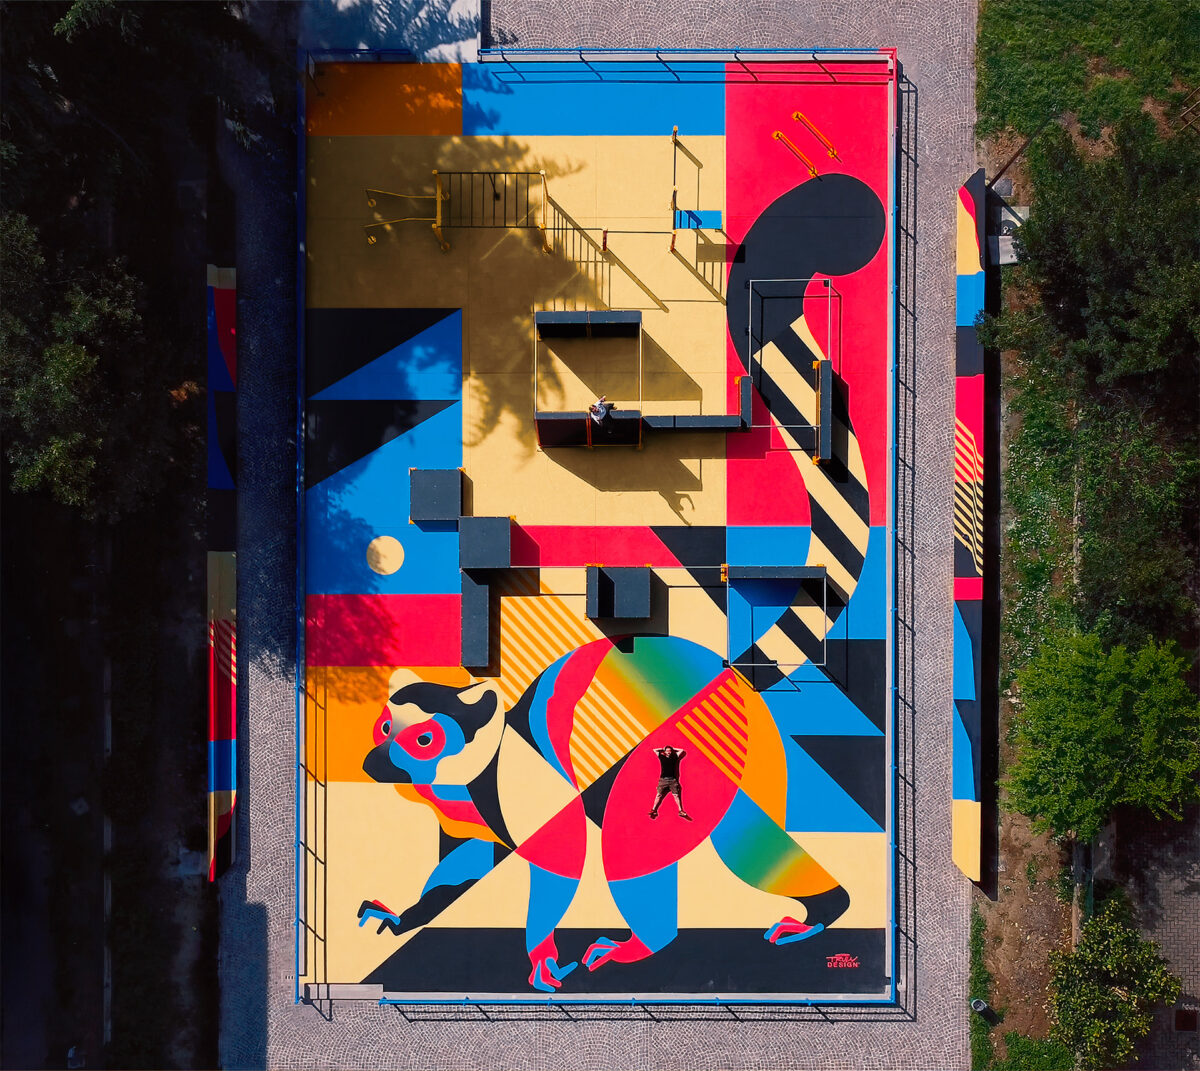 Mesmerizing Murals And Anamorphic Artworks By Art Collective Truly (9)